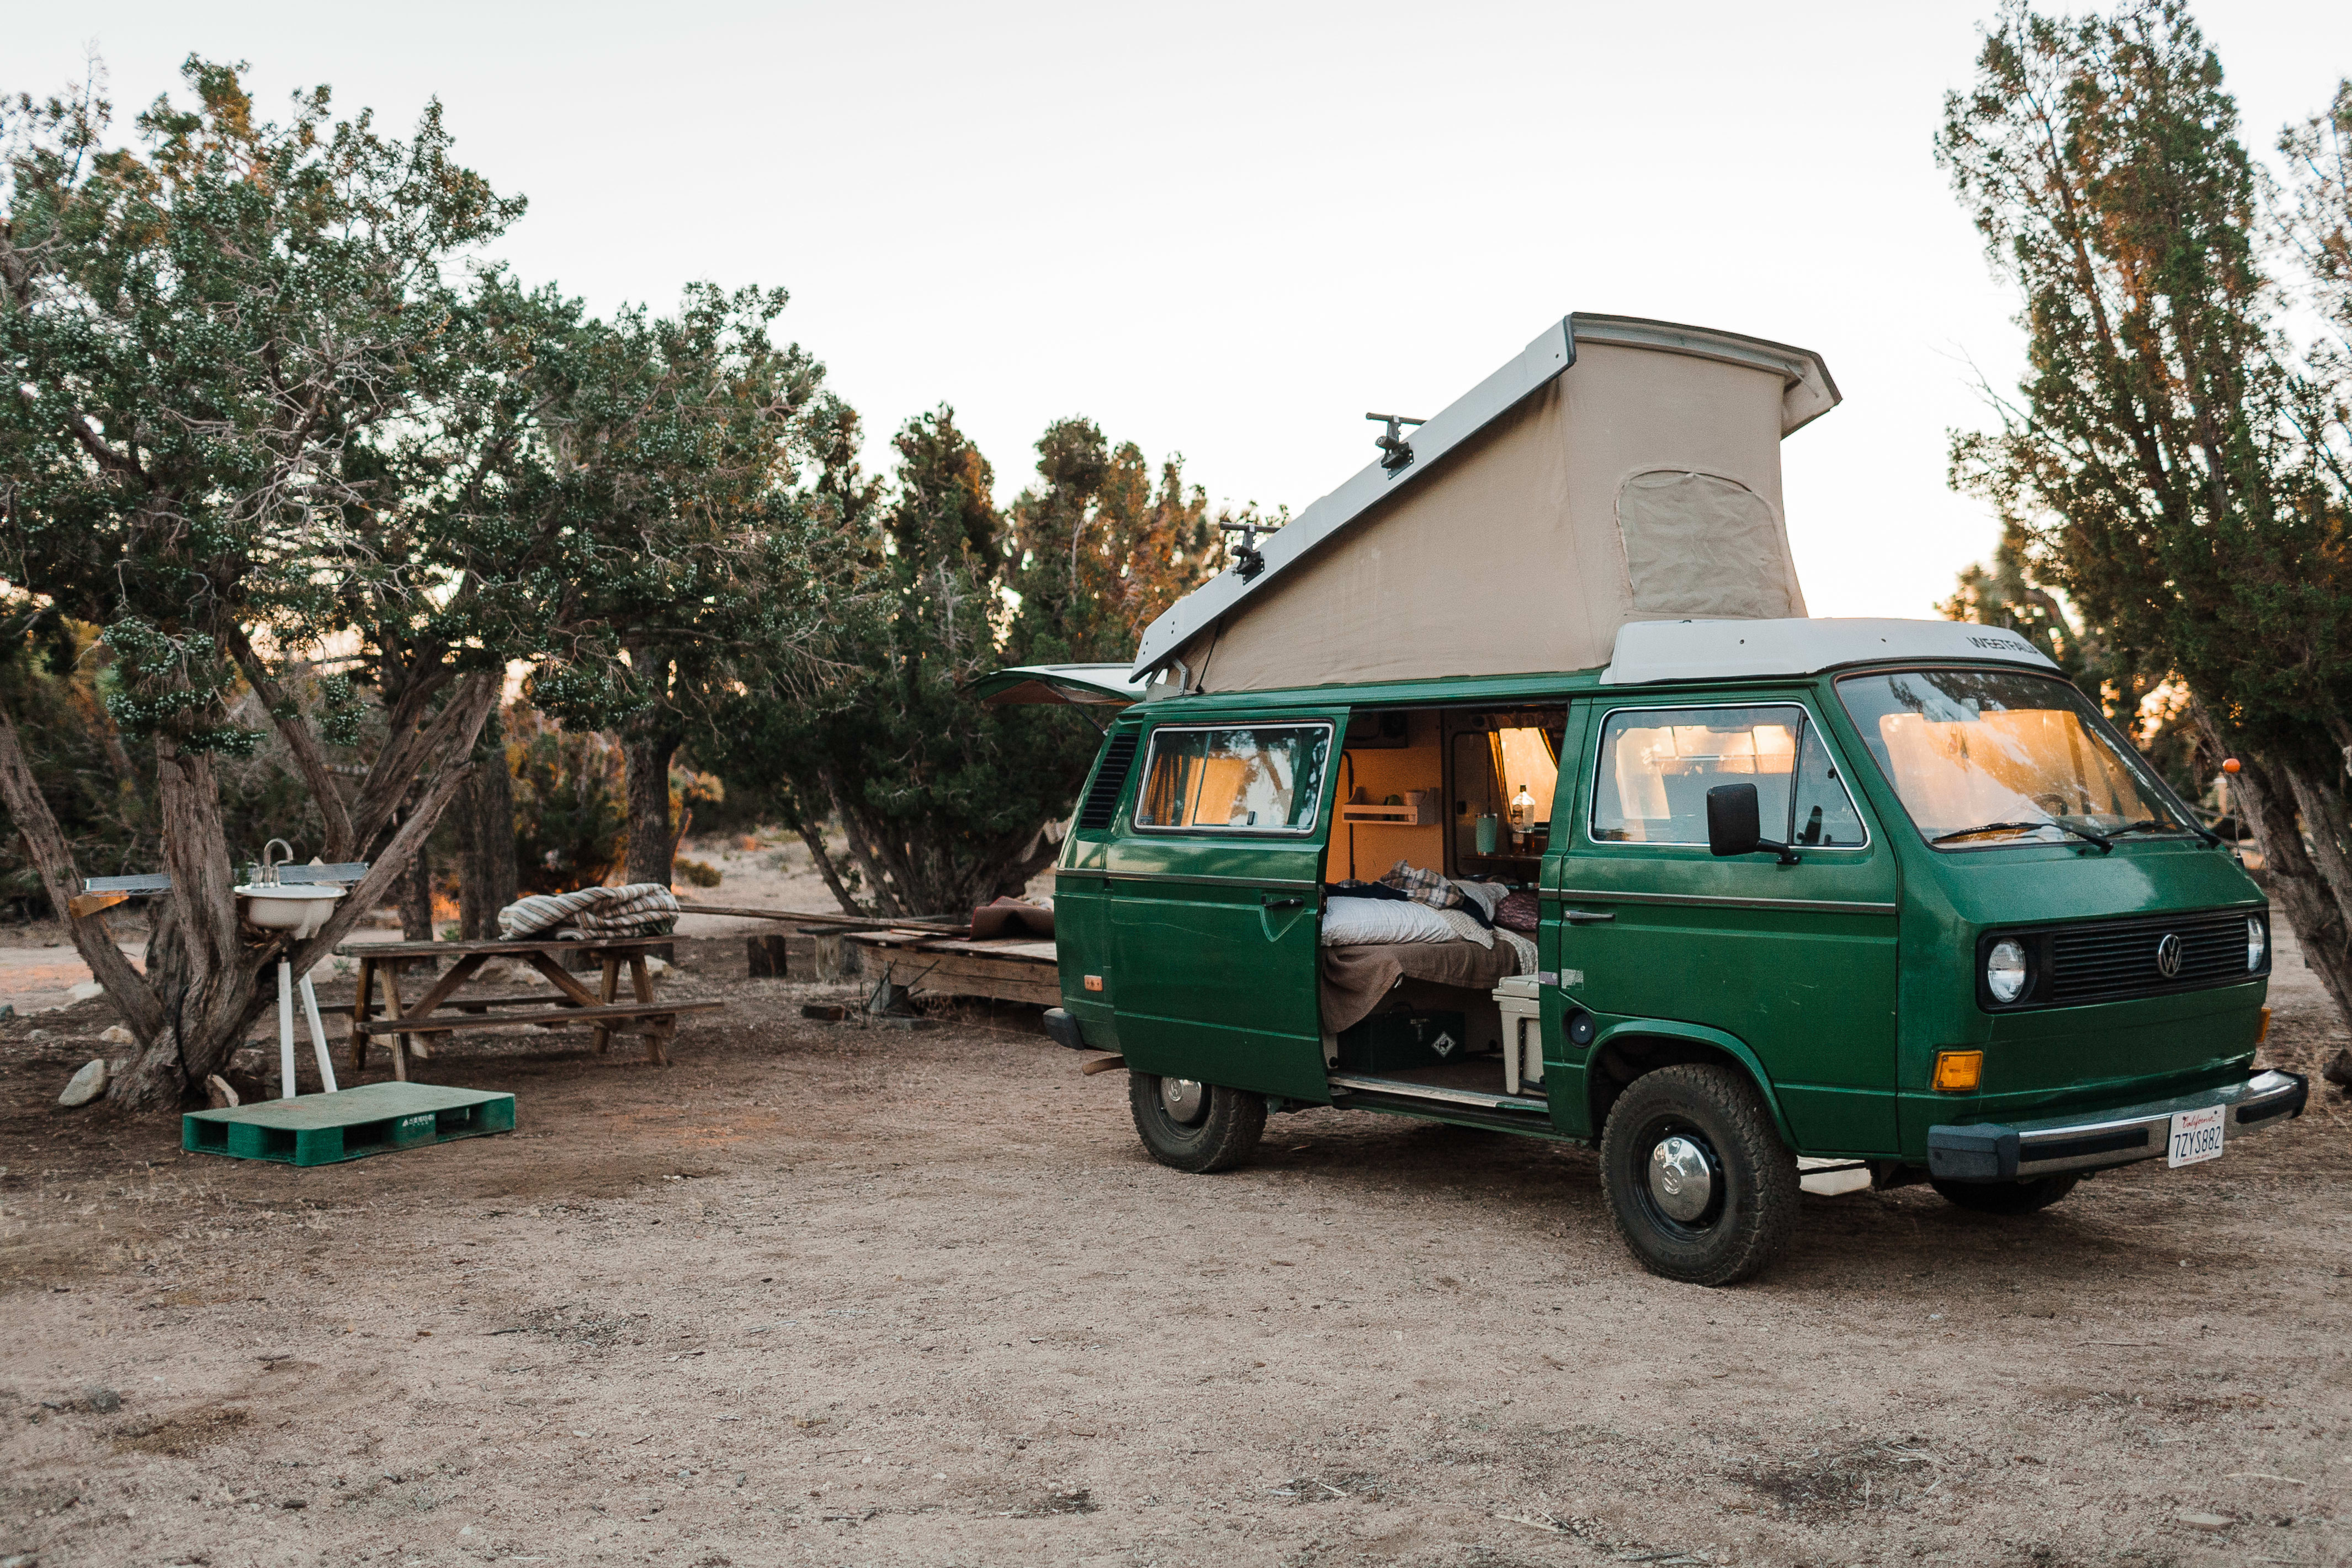 How Much Does It Cost to Camp at Joshua Tree?